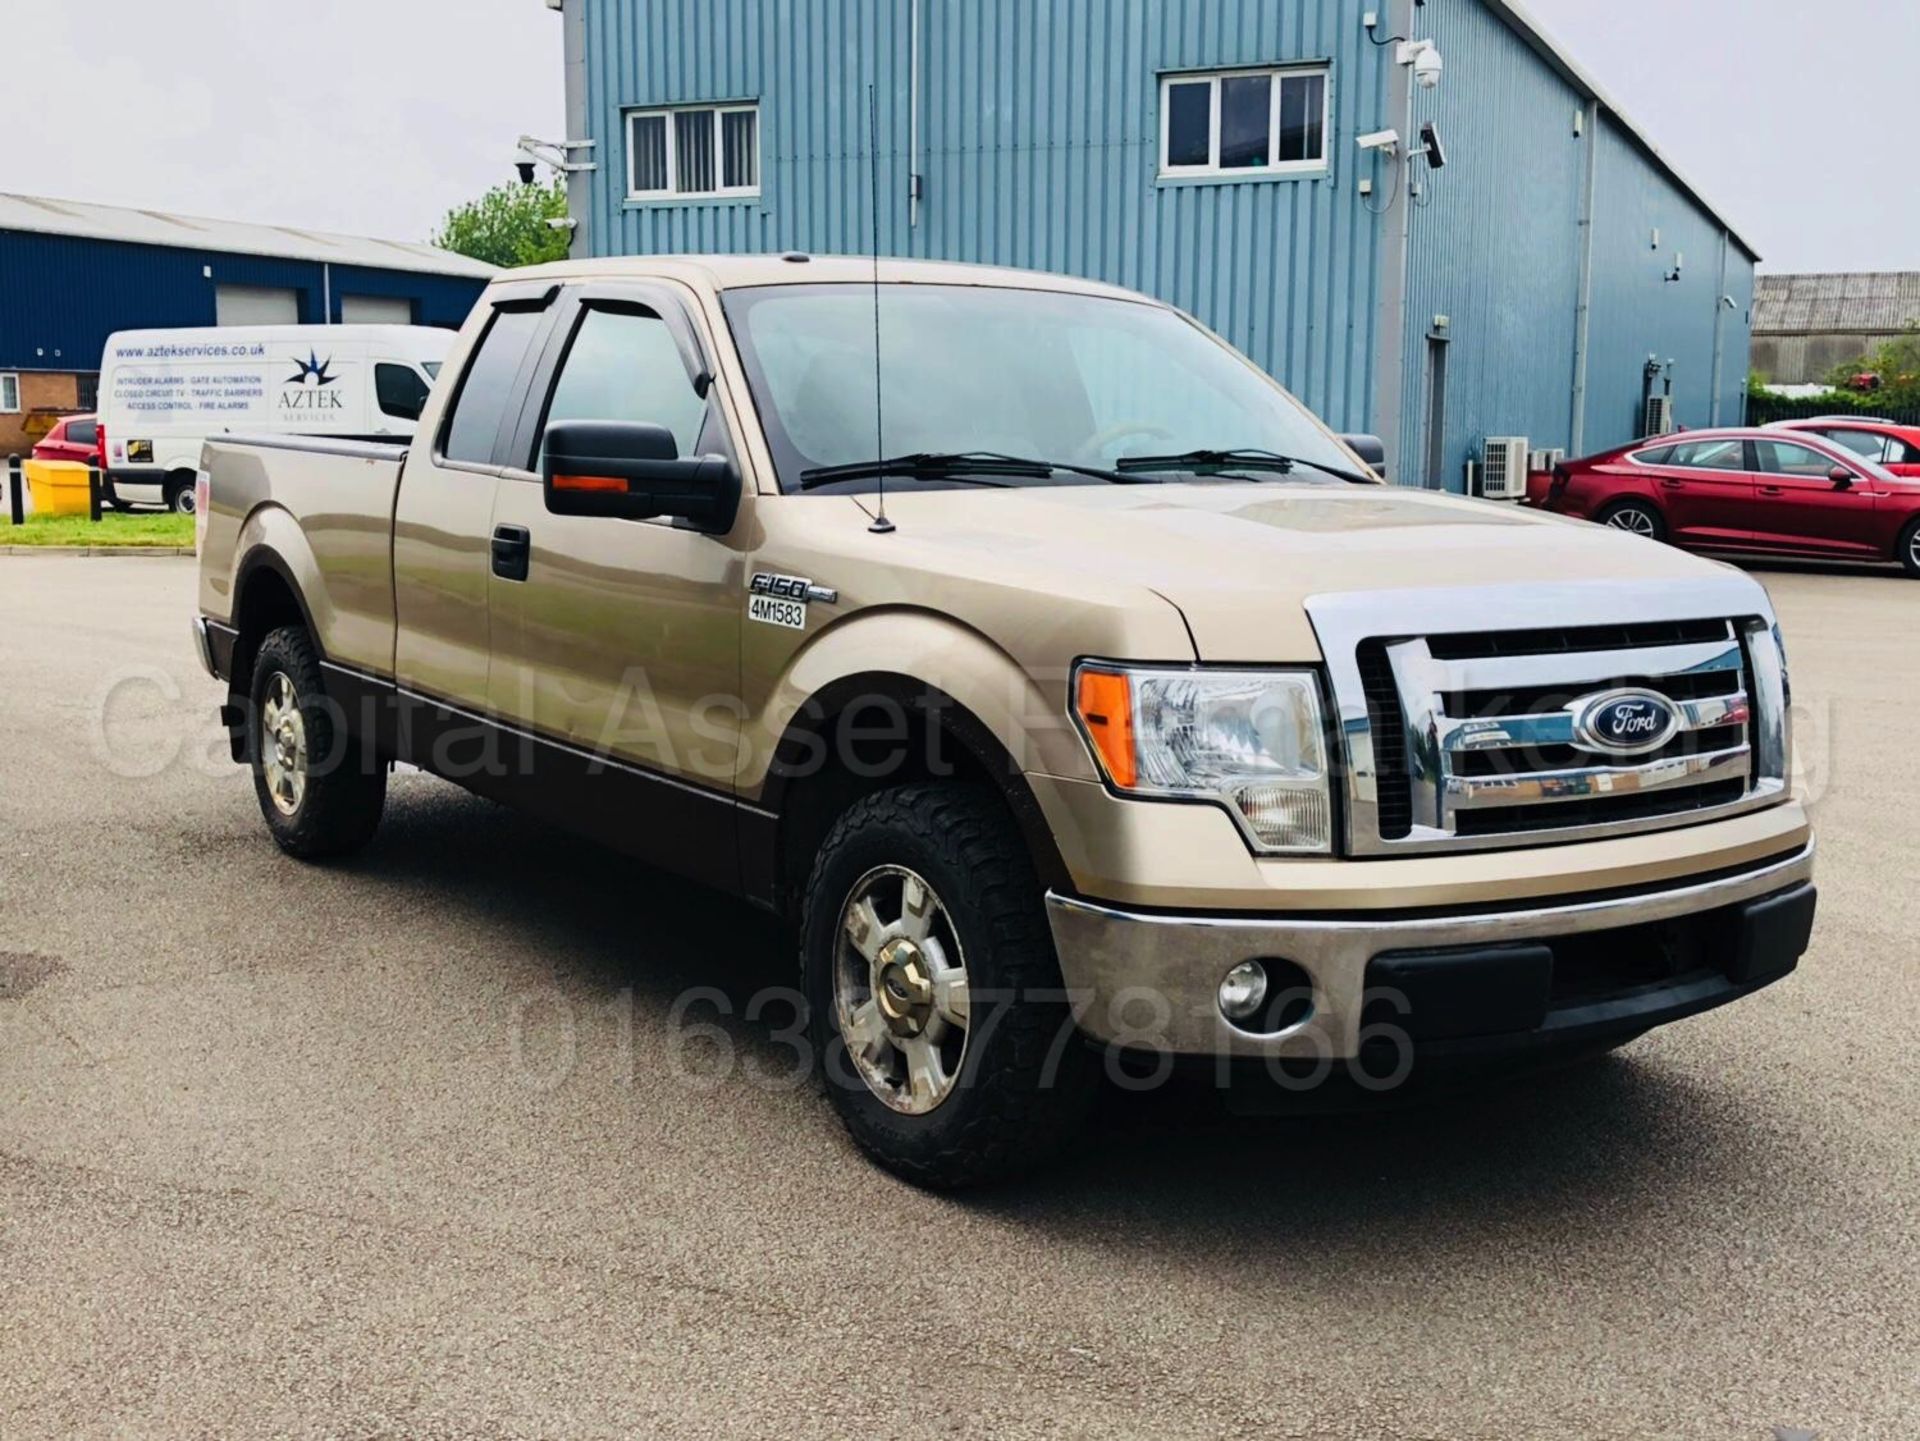 (ON SALE) FORD F-150 'XLT EDITION' KING CAB (2012 MODEL) '5.0 V8 - COLUM GEARBOX' **MASSIVE SPEC** - Image 12 of 33